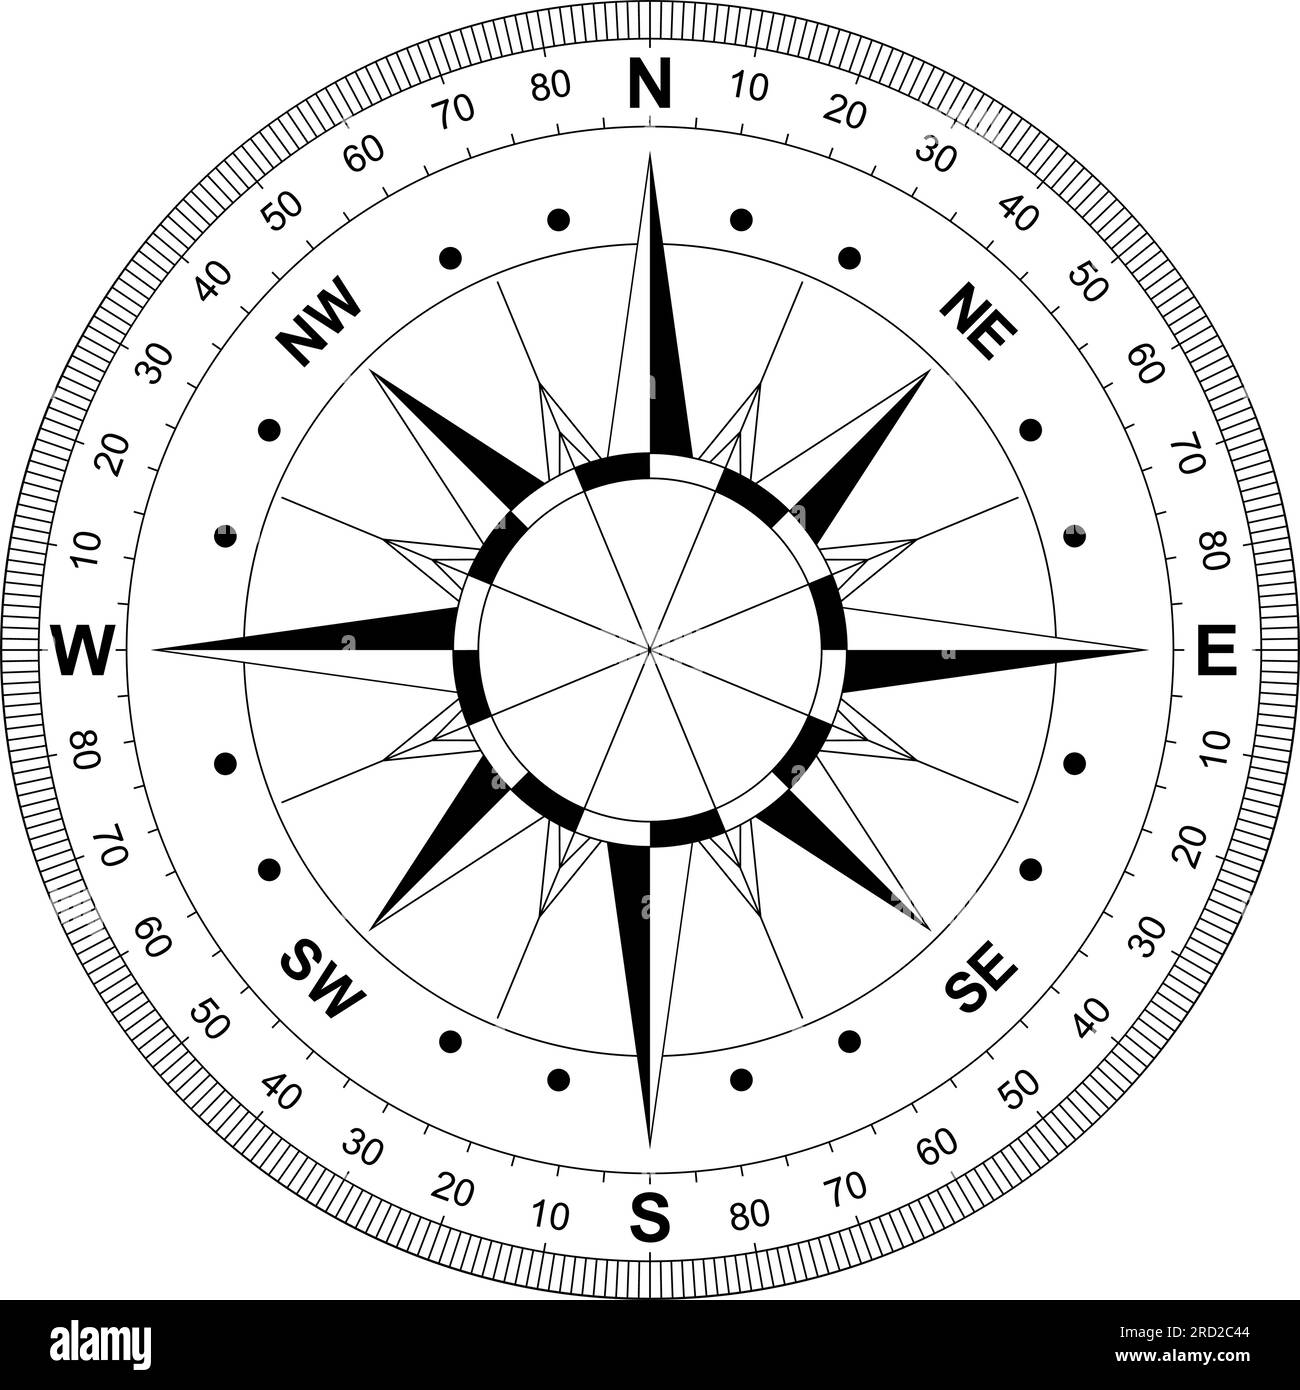 Compass rose vector with all thirty two wind directions. Wind Rose